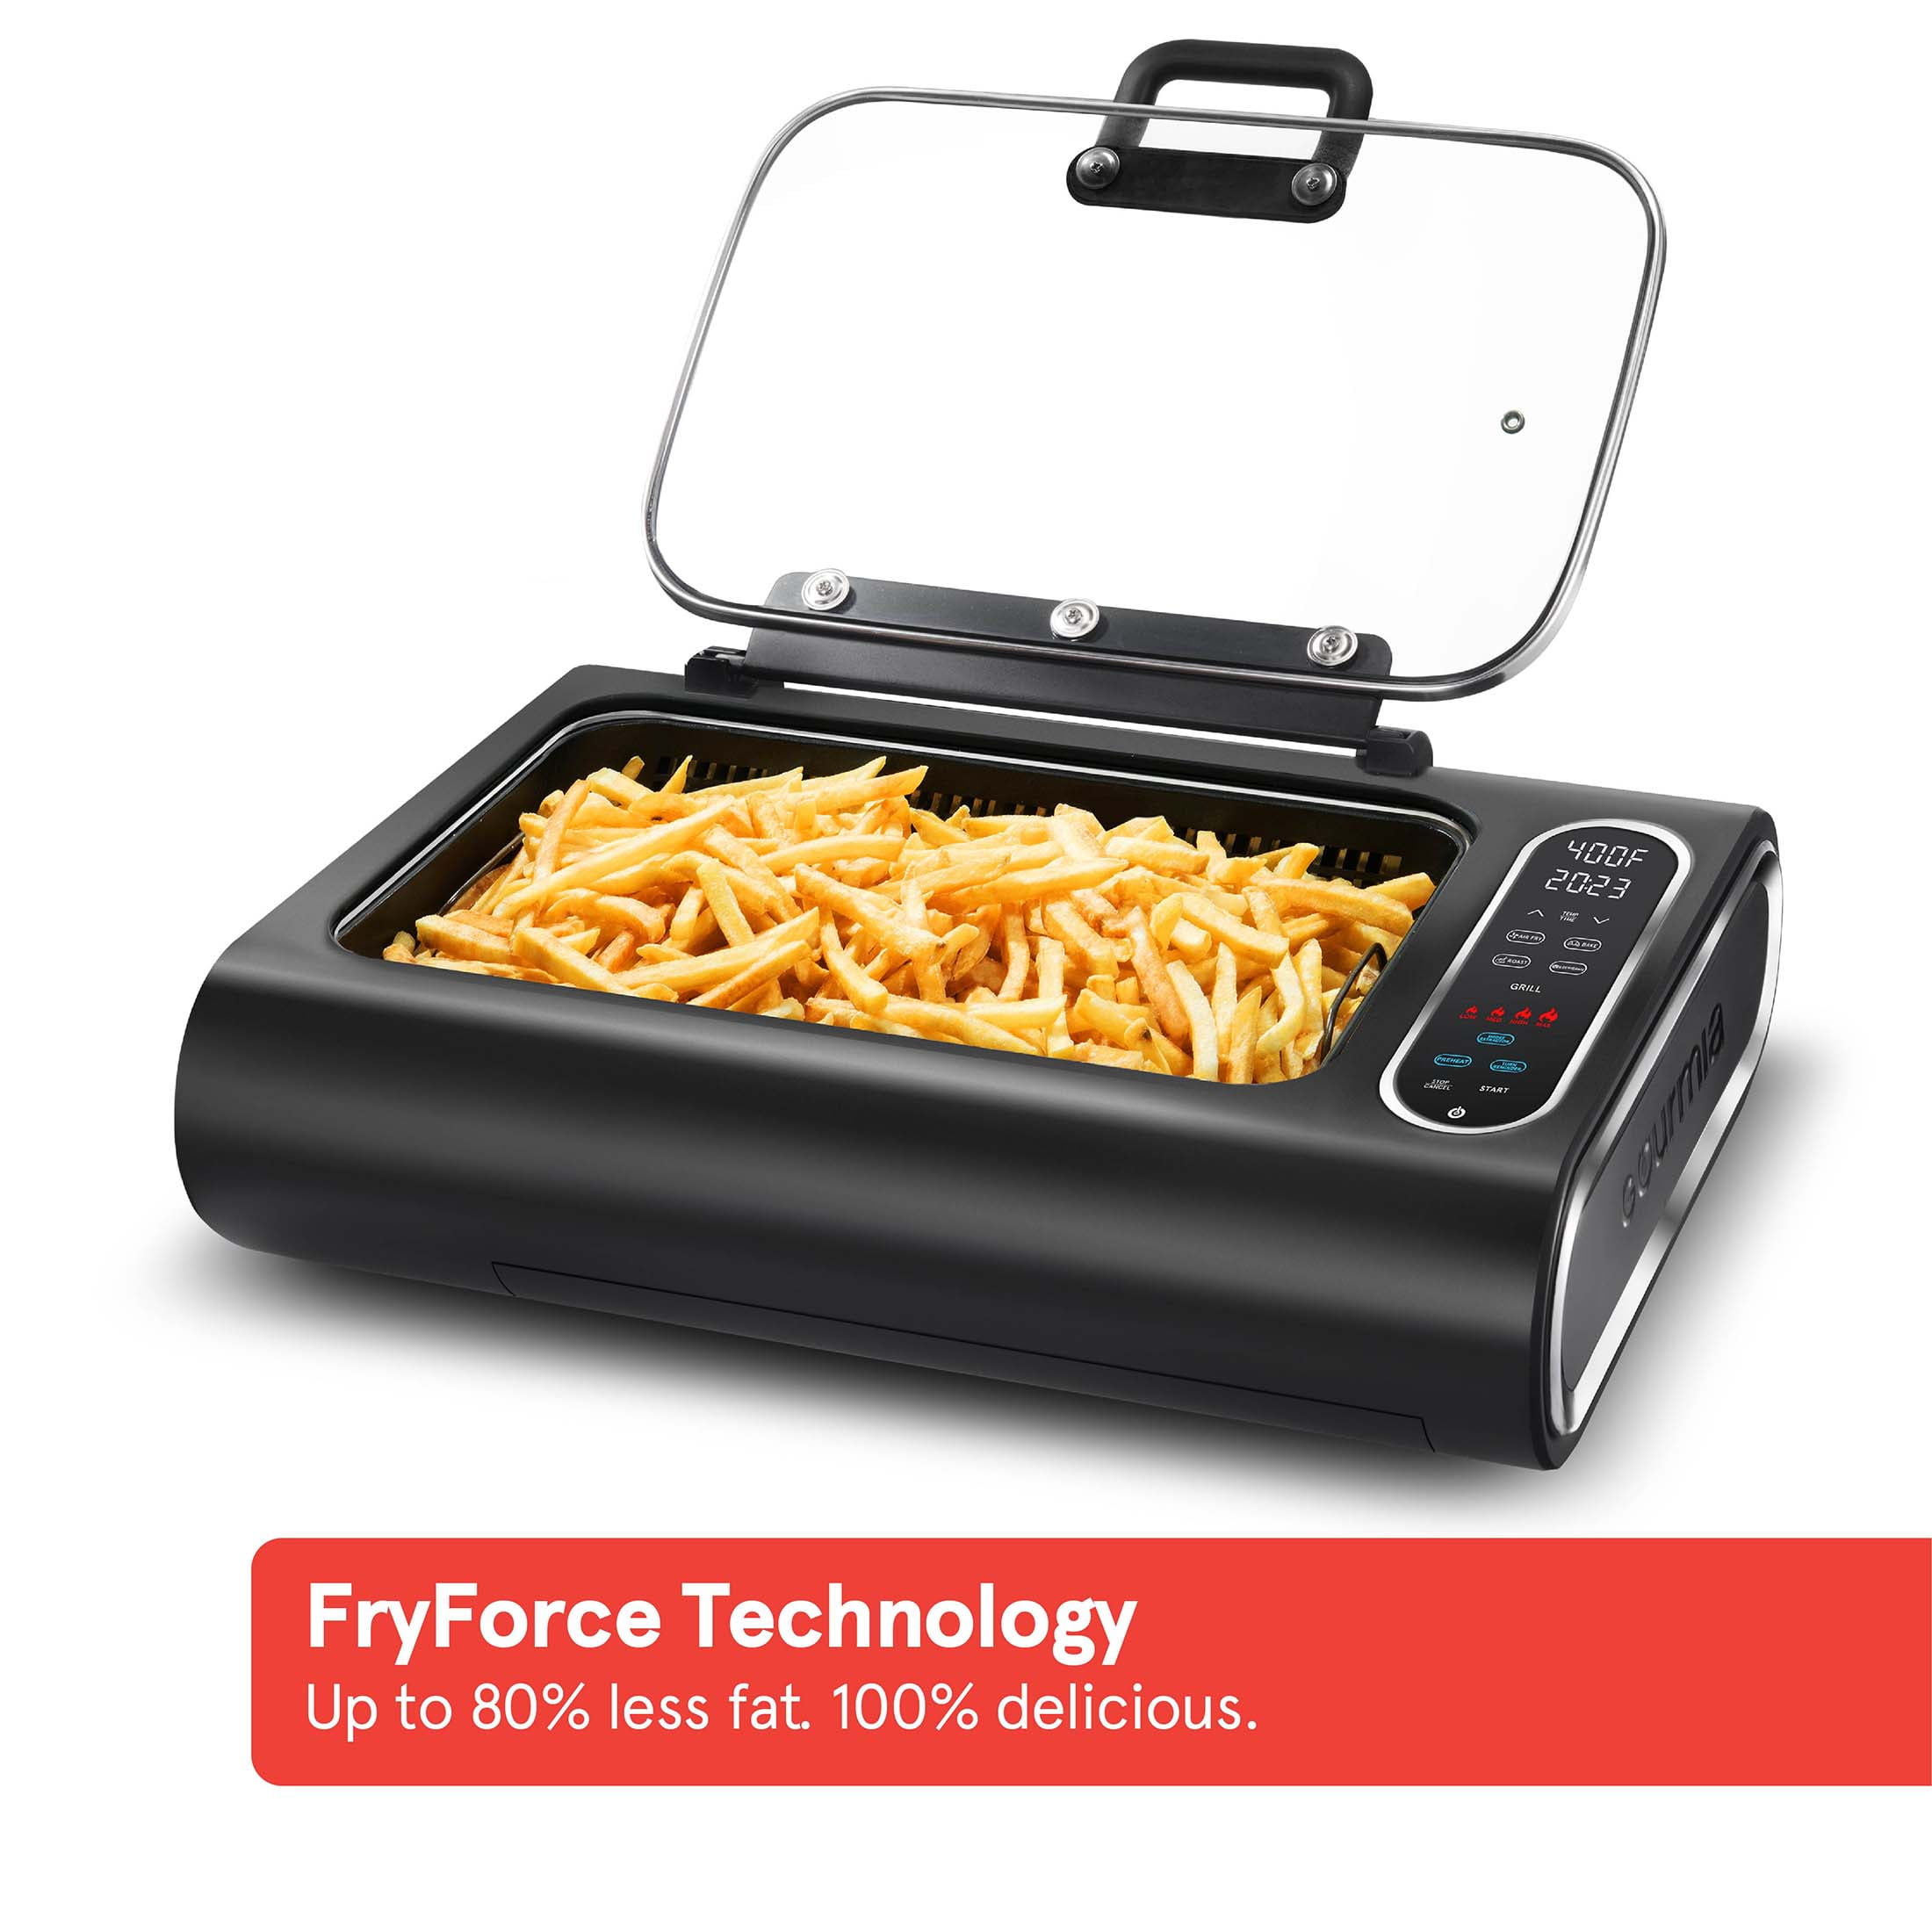 Gourmia FoodStation Smokeless Grill, Griddle, & Air Fryer with